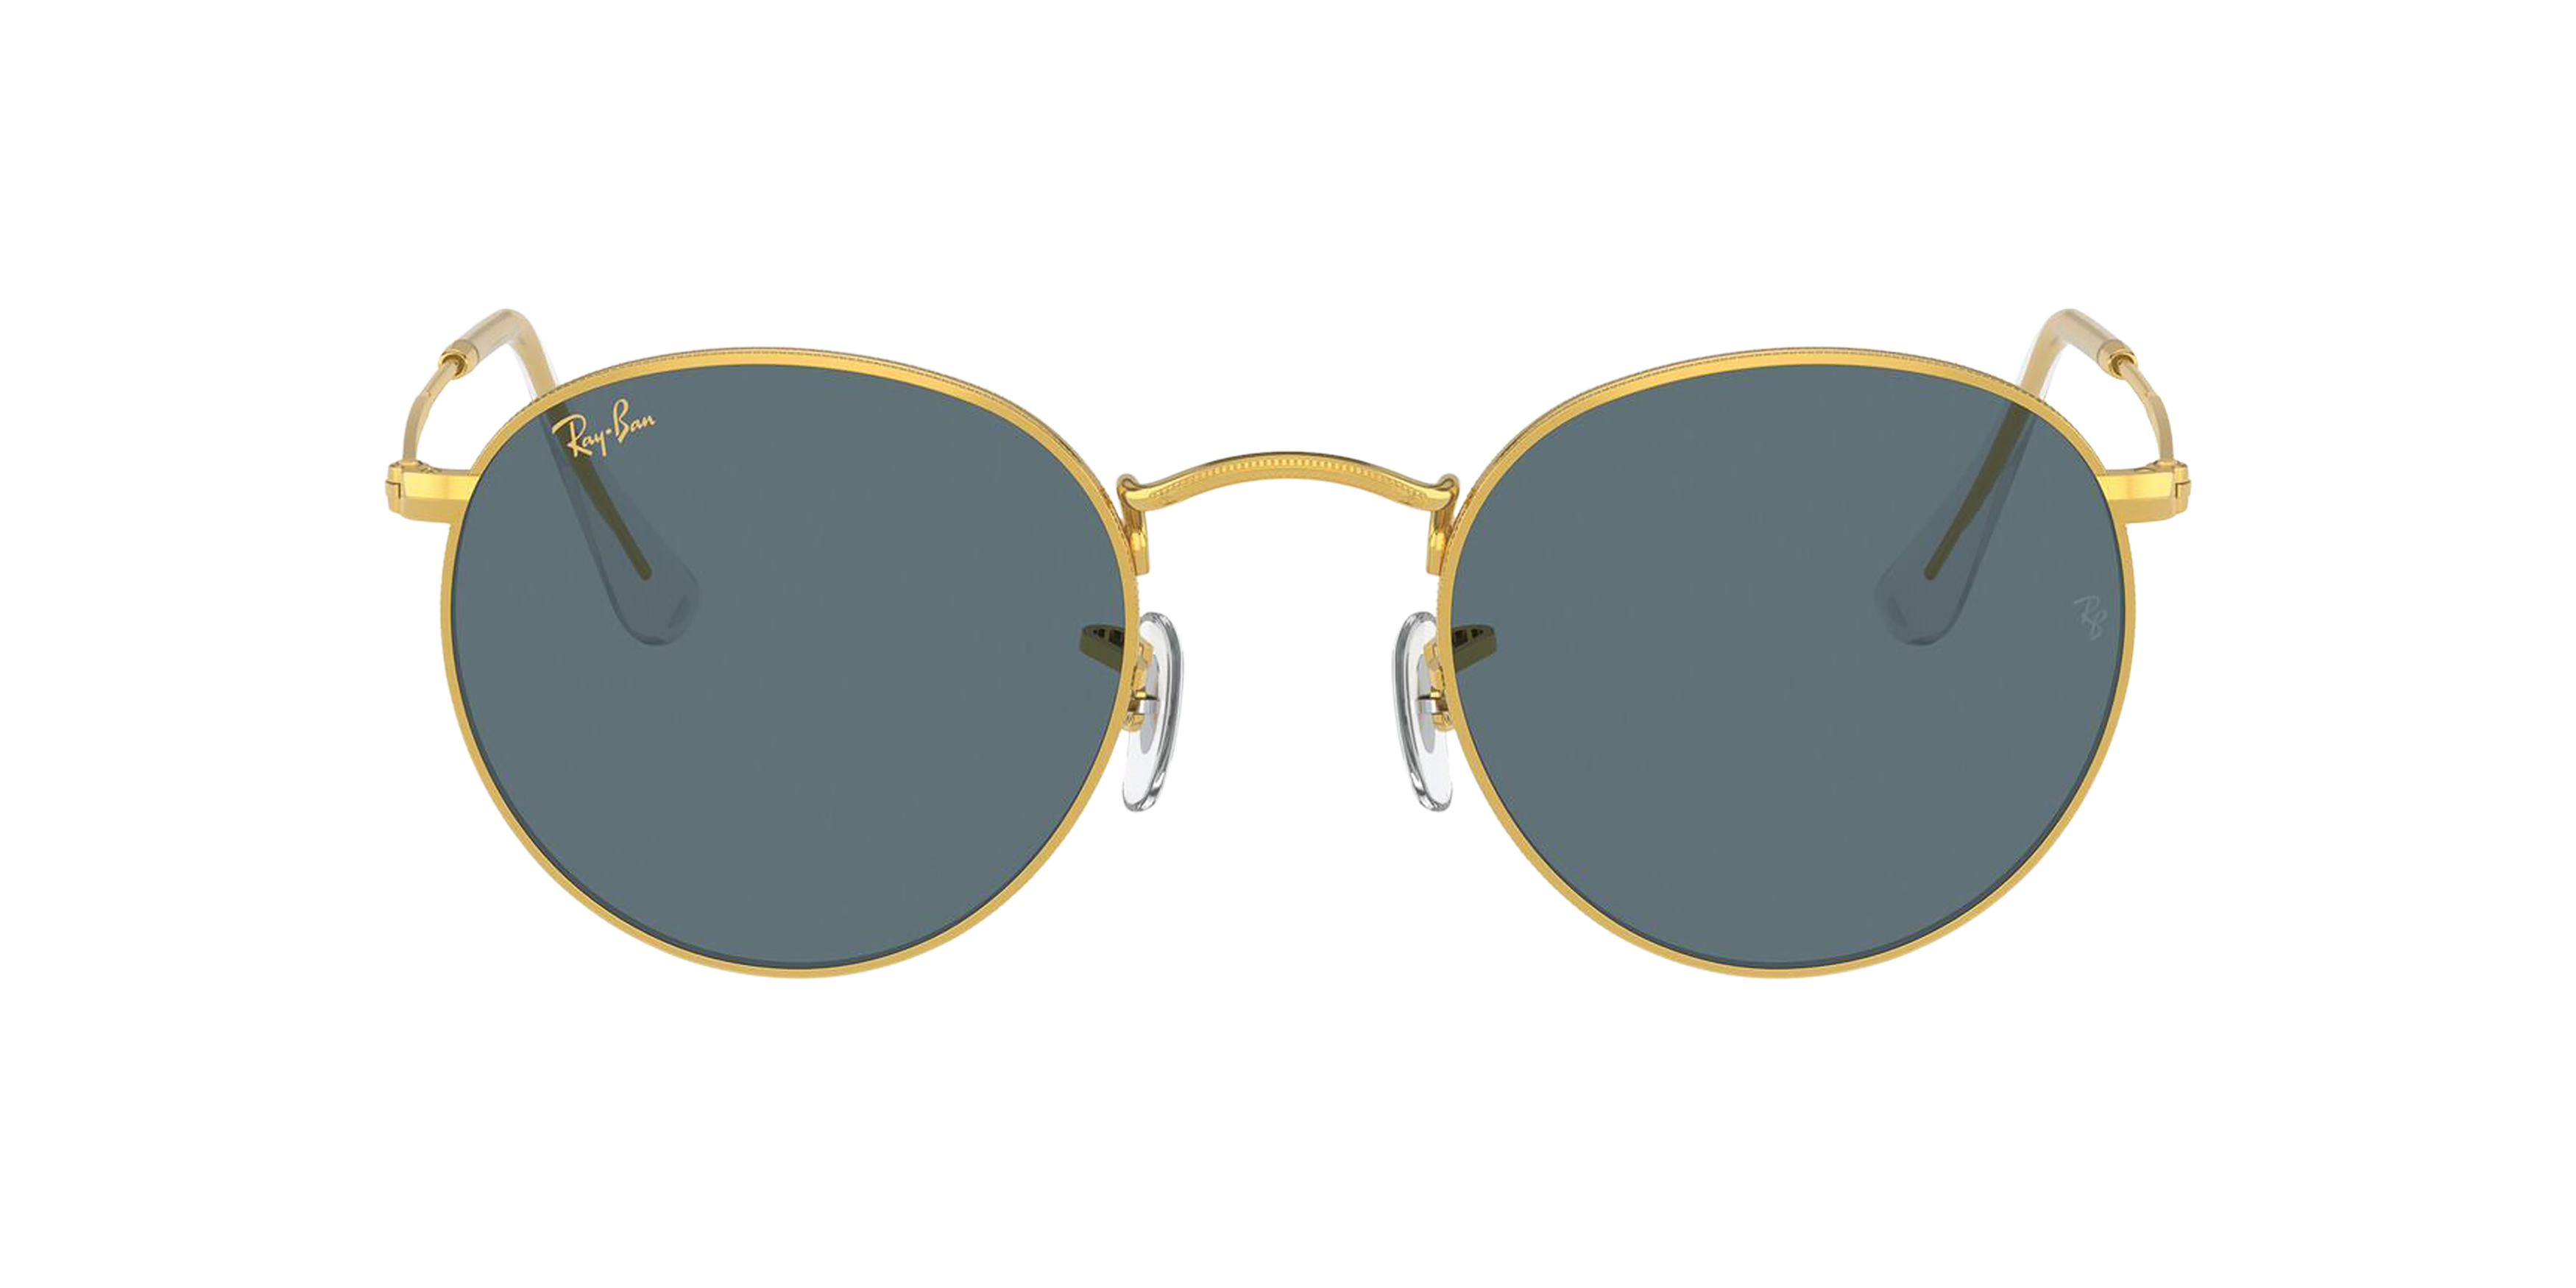 [products.image.front] Ray-Ban Round Metal Legend Gold RB3447 9196R5